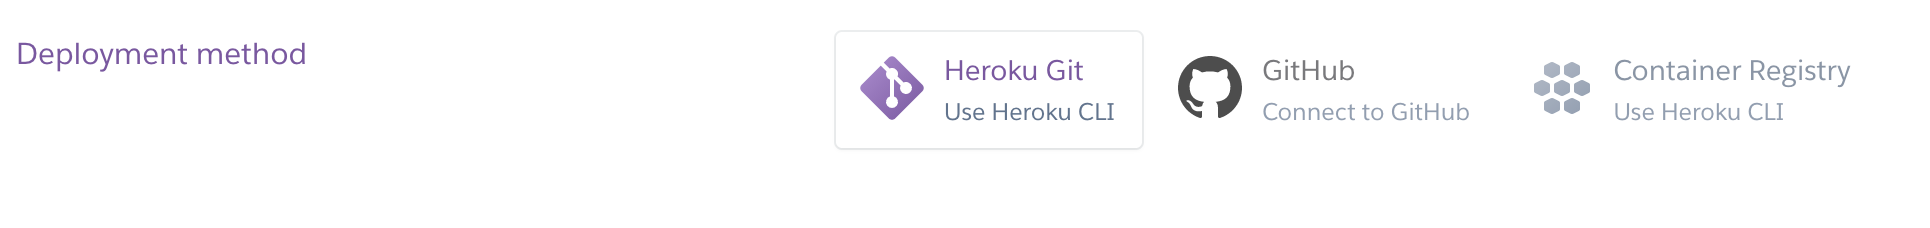 Automated deployment in Heroku